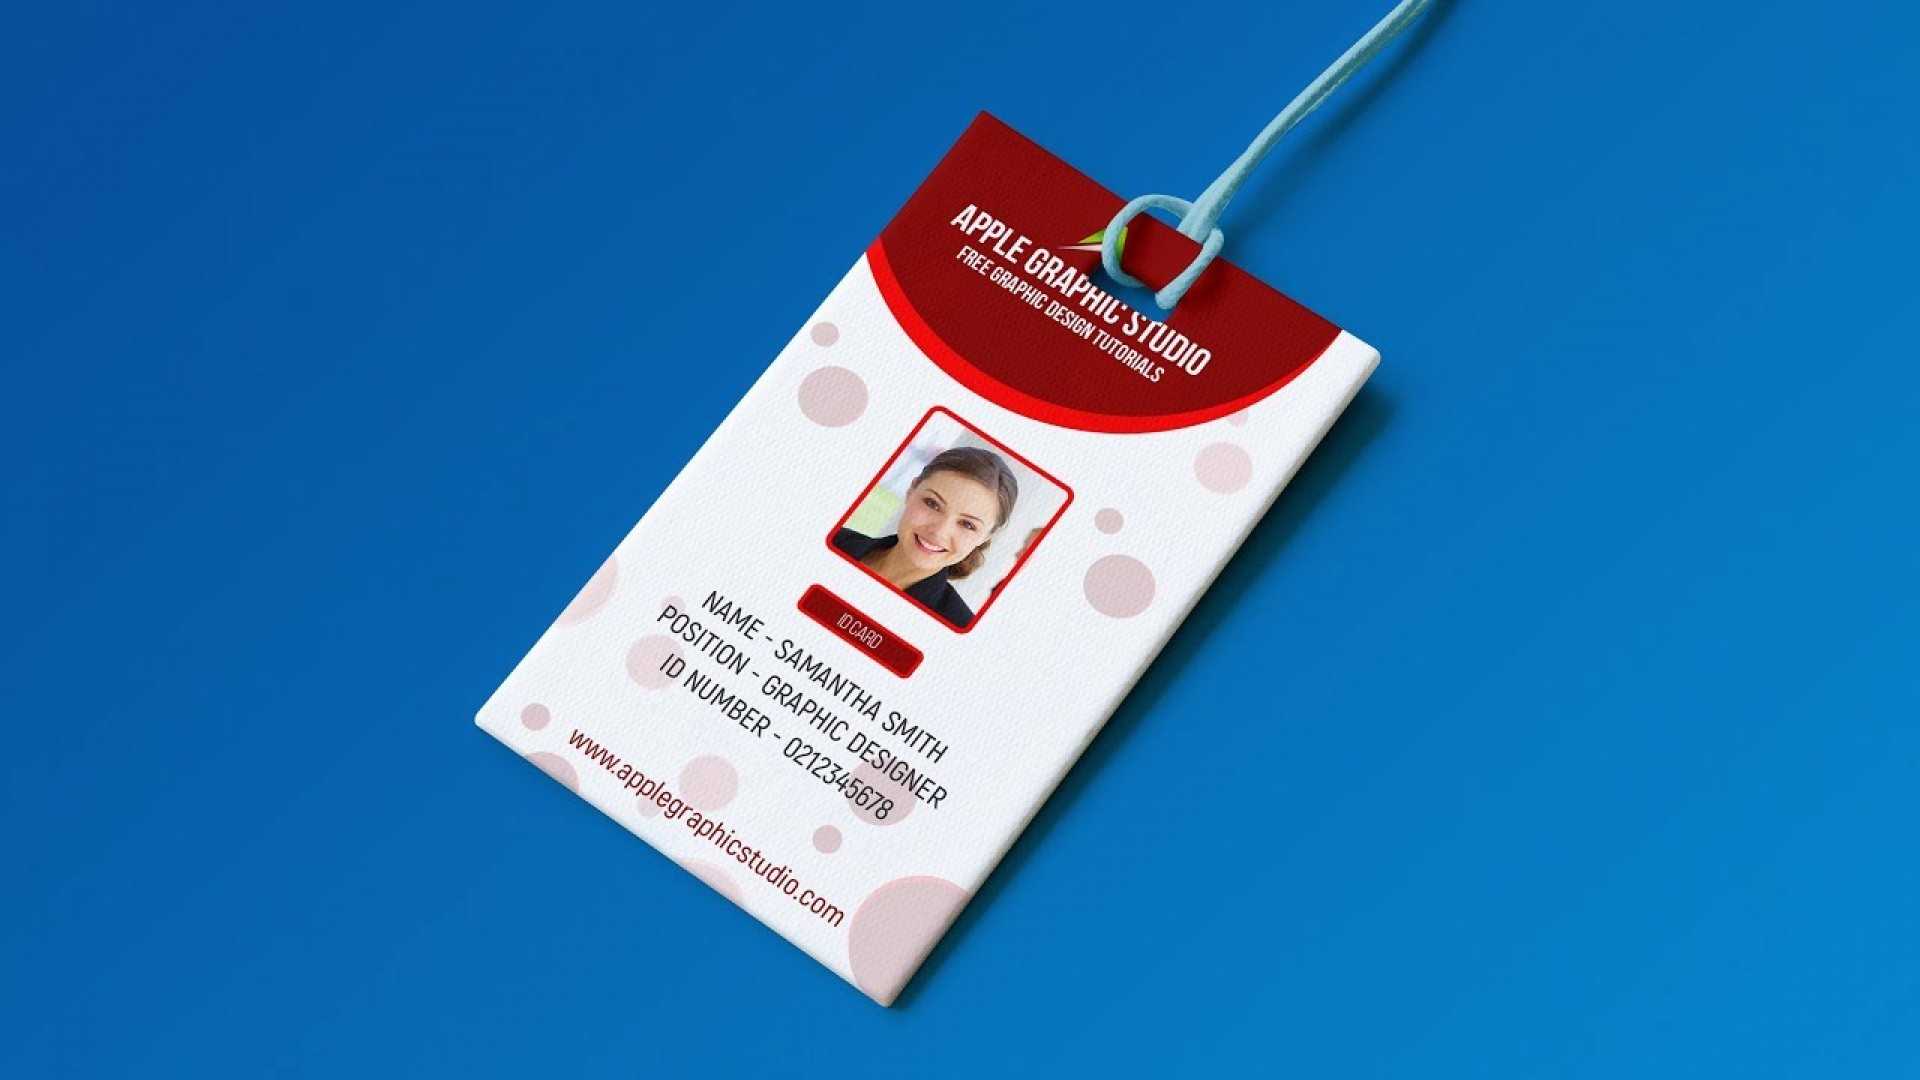 002 Maxresdefault Template Ideas Id Card Photoshop 1920X1080 In Id Card Design Template Psd Free Download